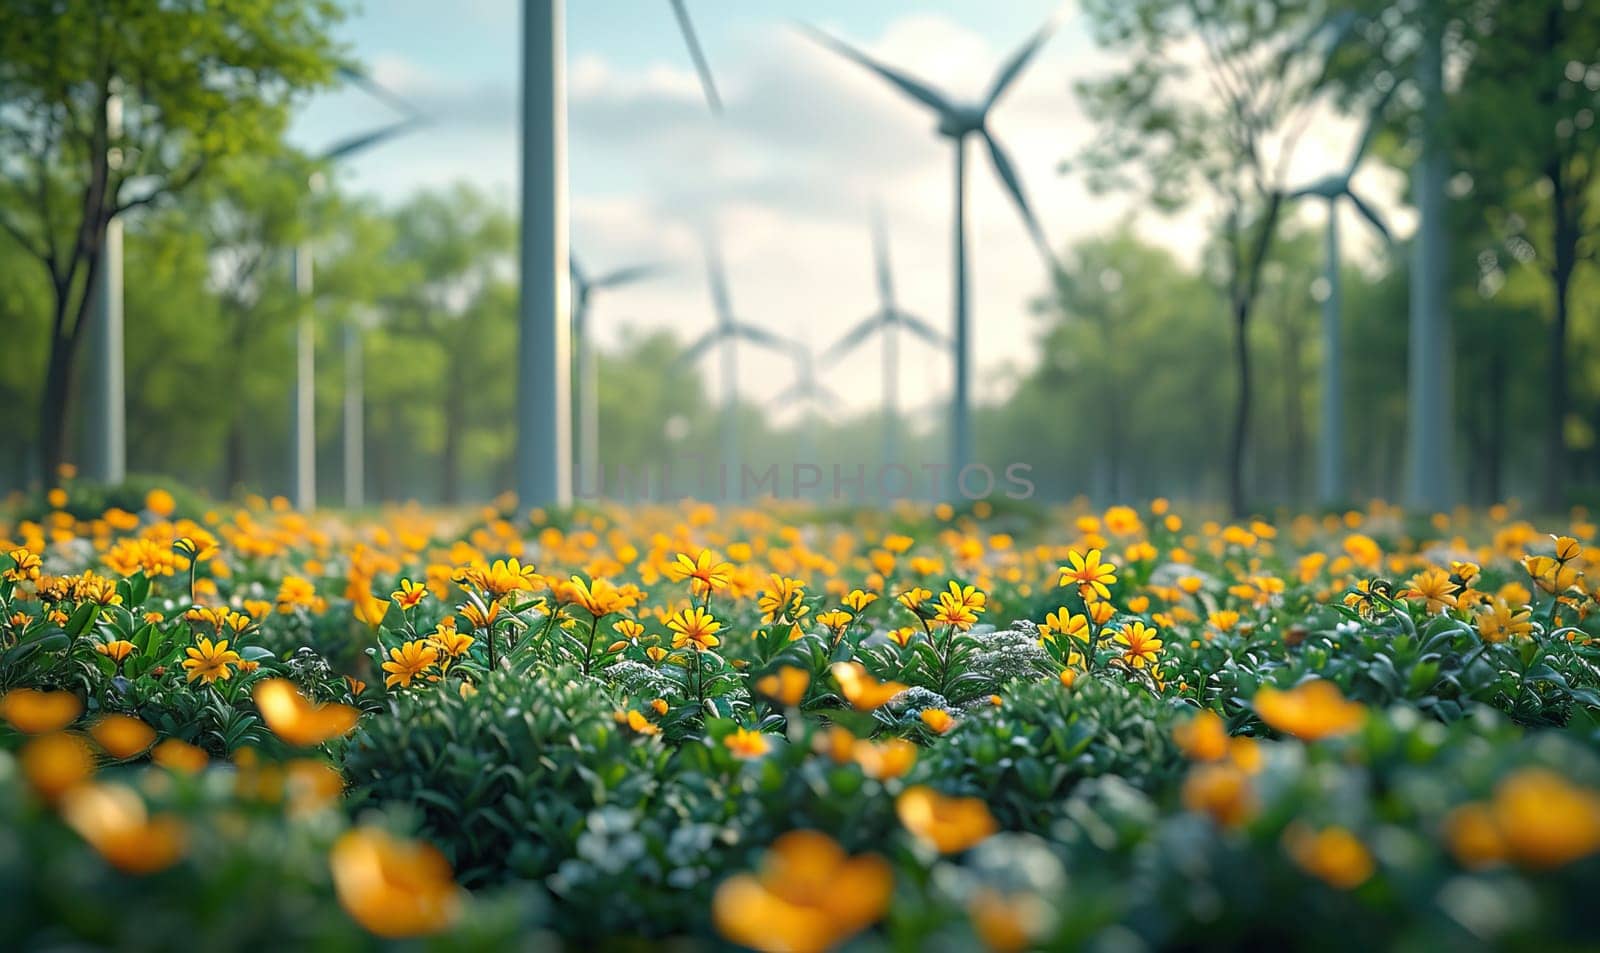 AI creates field with yellow flowers & windmills by Fischeron